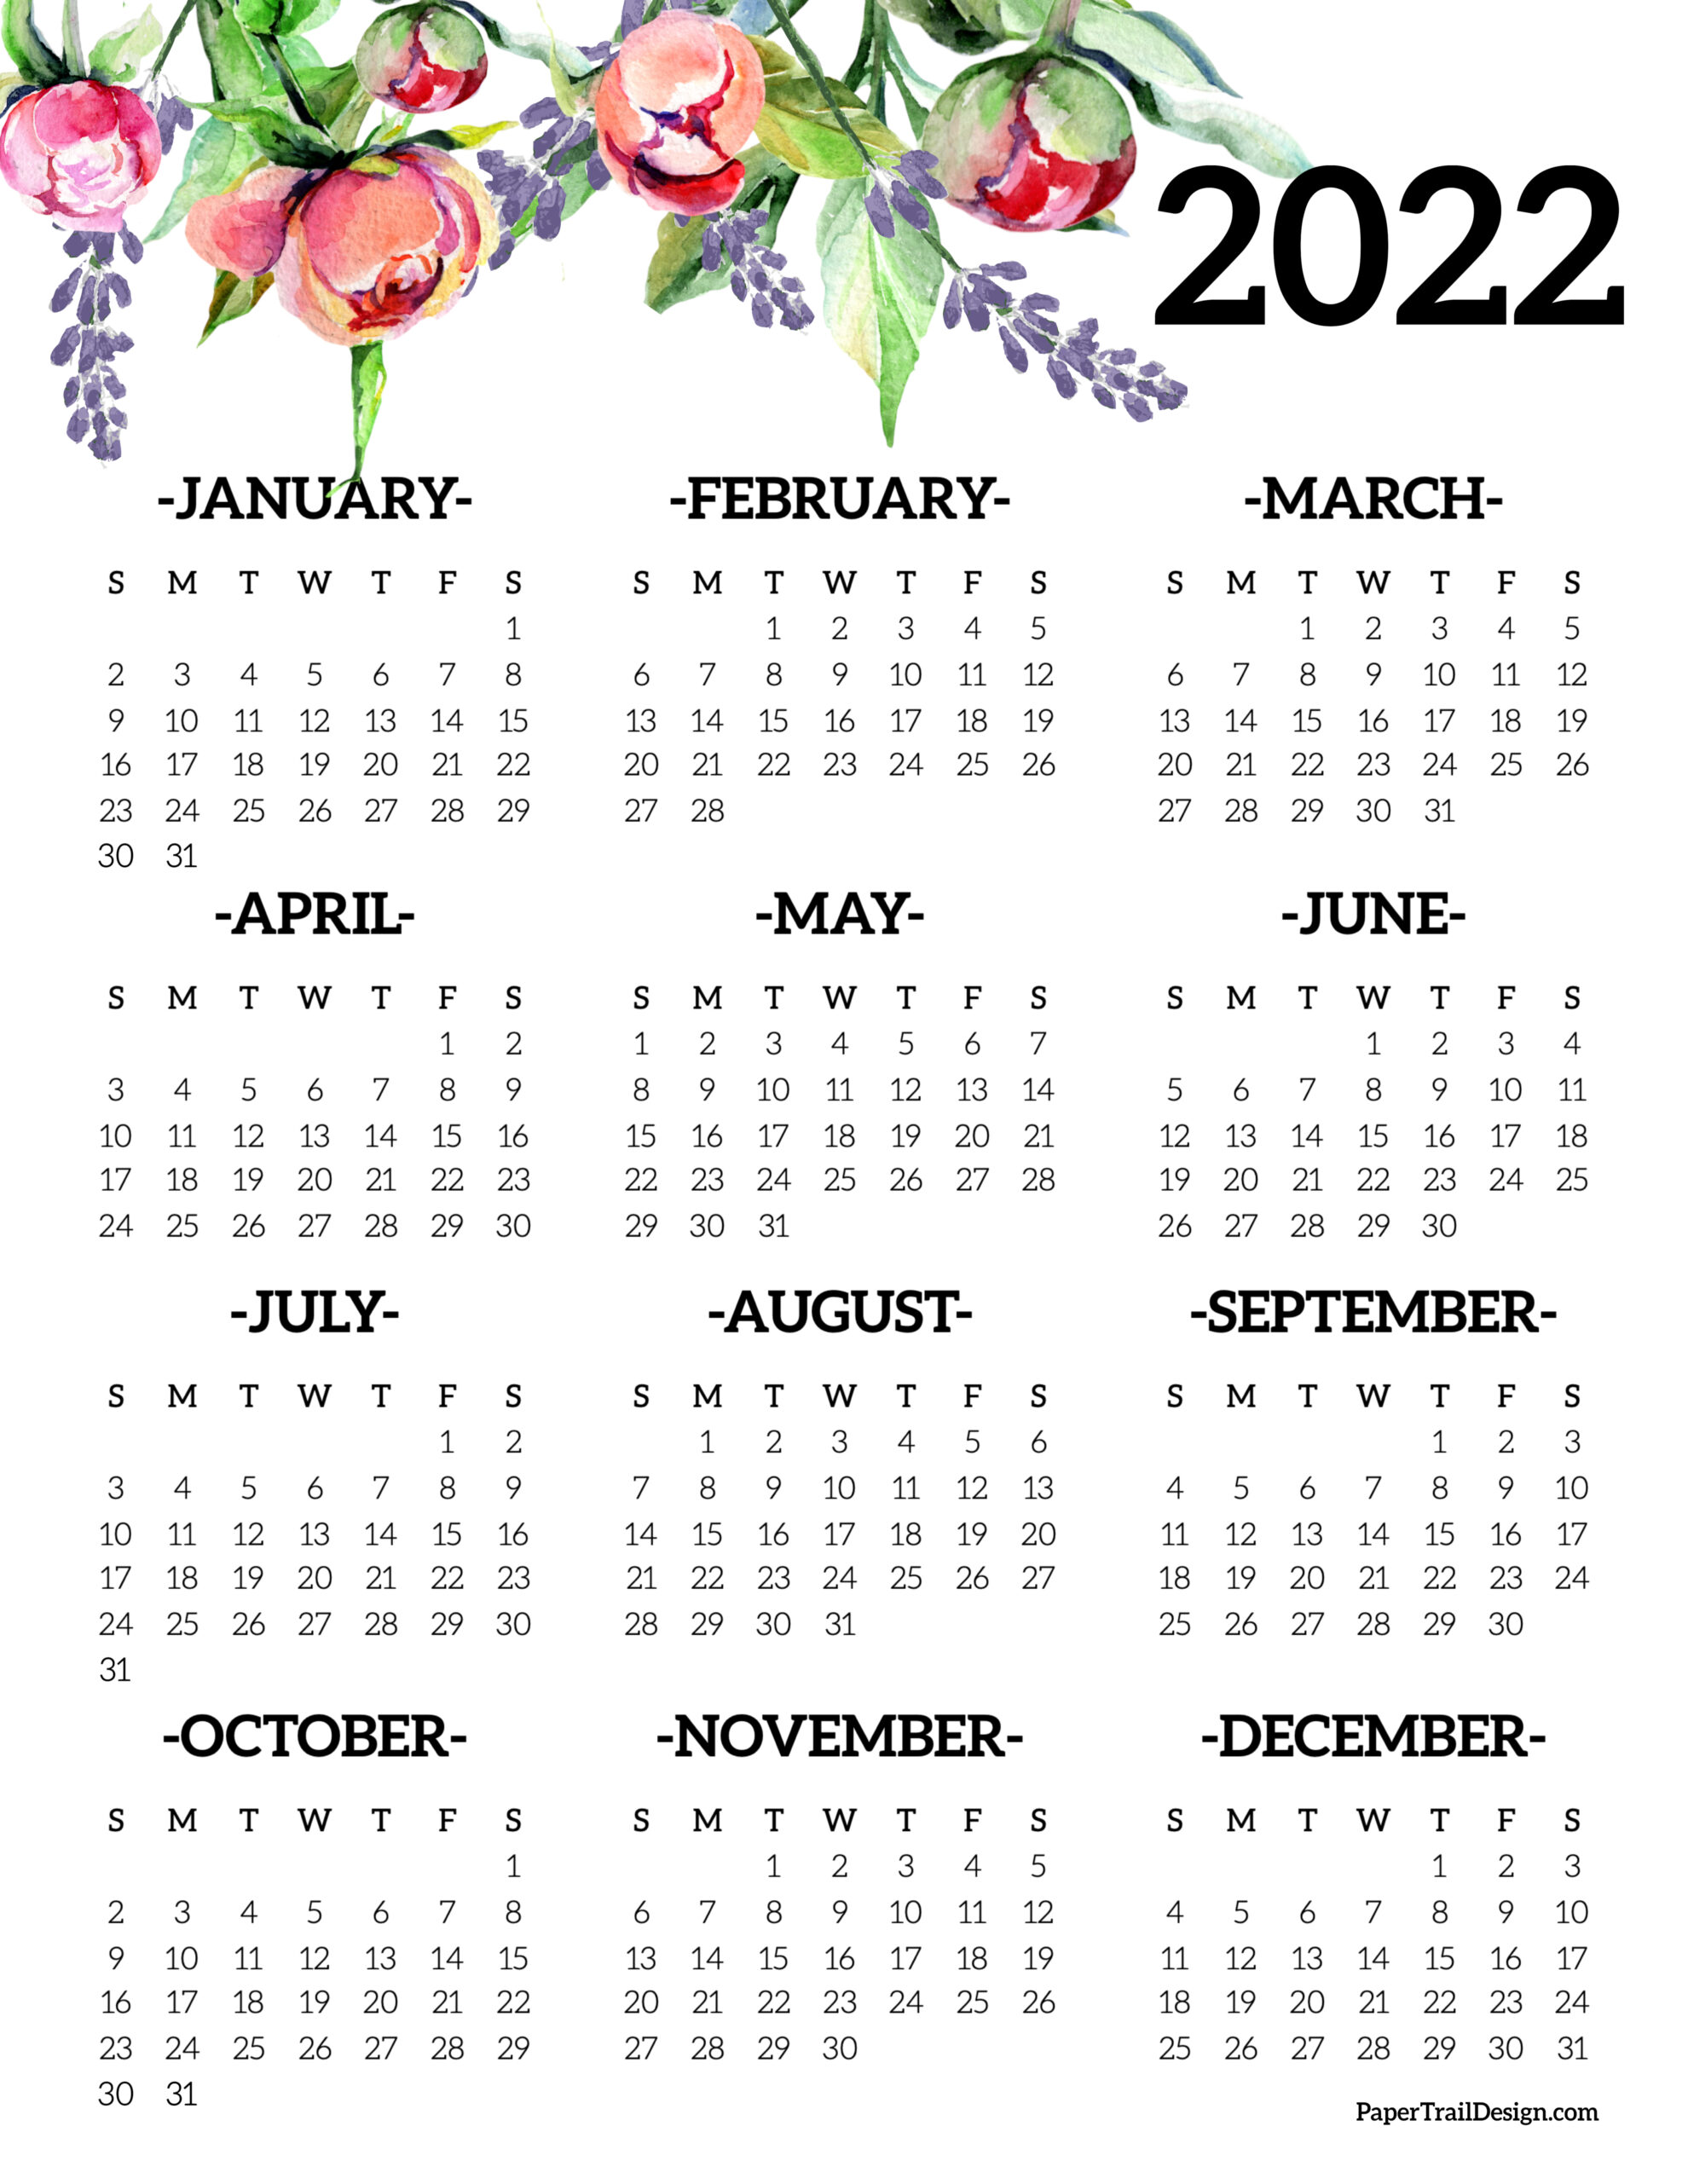 Free Printable 2022 Calendar One Page Calendar 2022 Printable One Page - Paper Trail Design